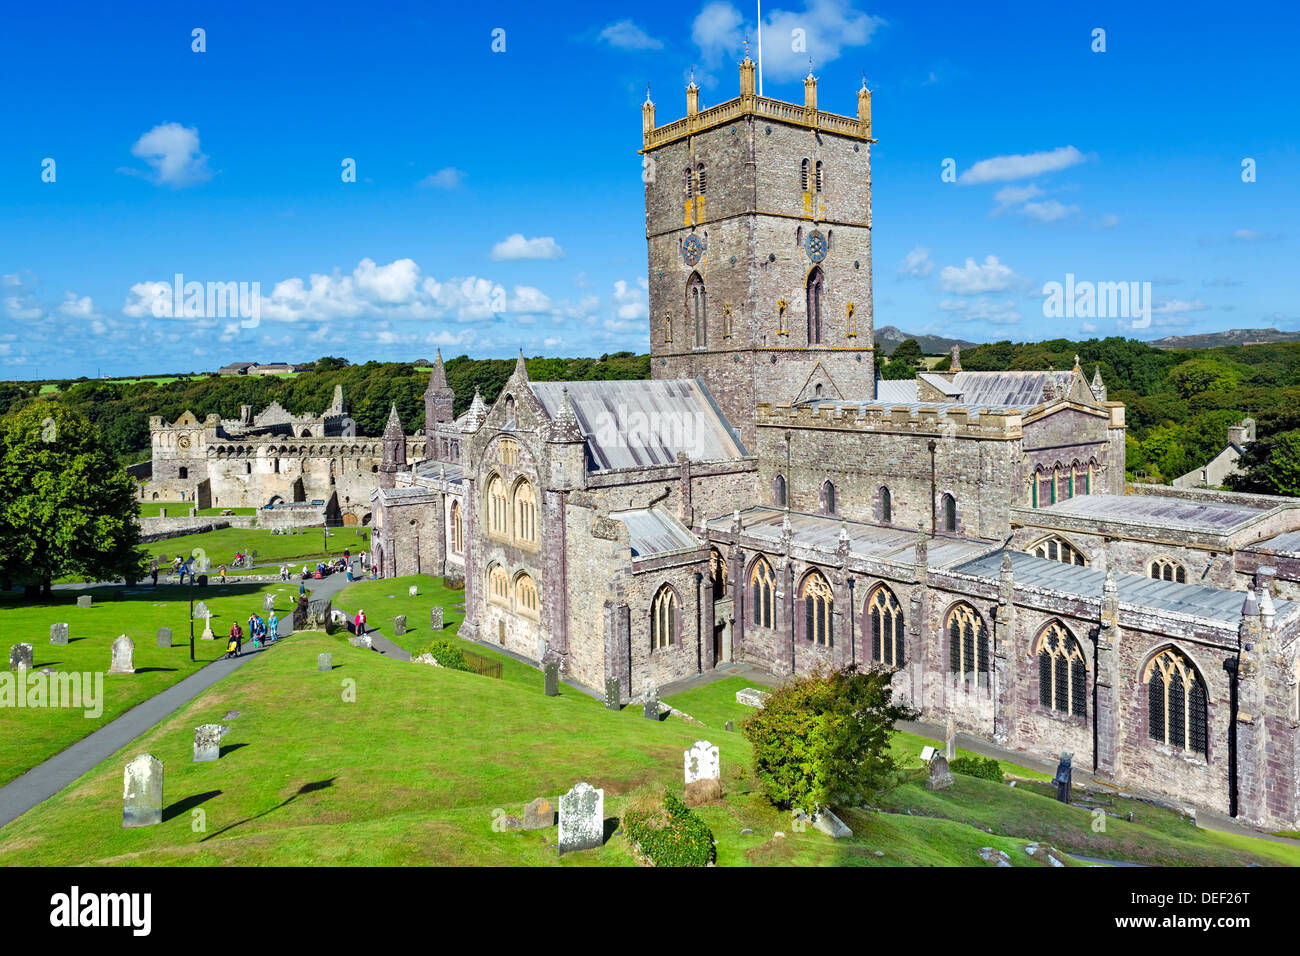 St David's Cathedral with the Bishops Palace behind, St David's, Pembrokeshire, Wales, UK Stock Photo